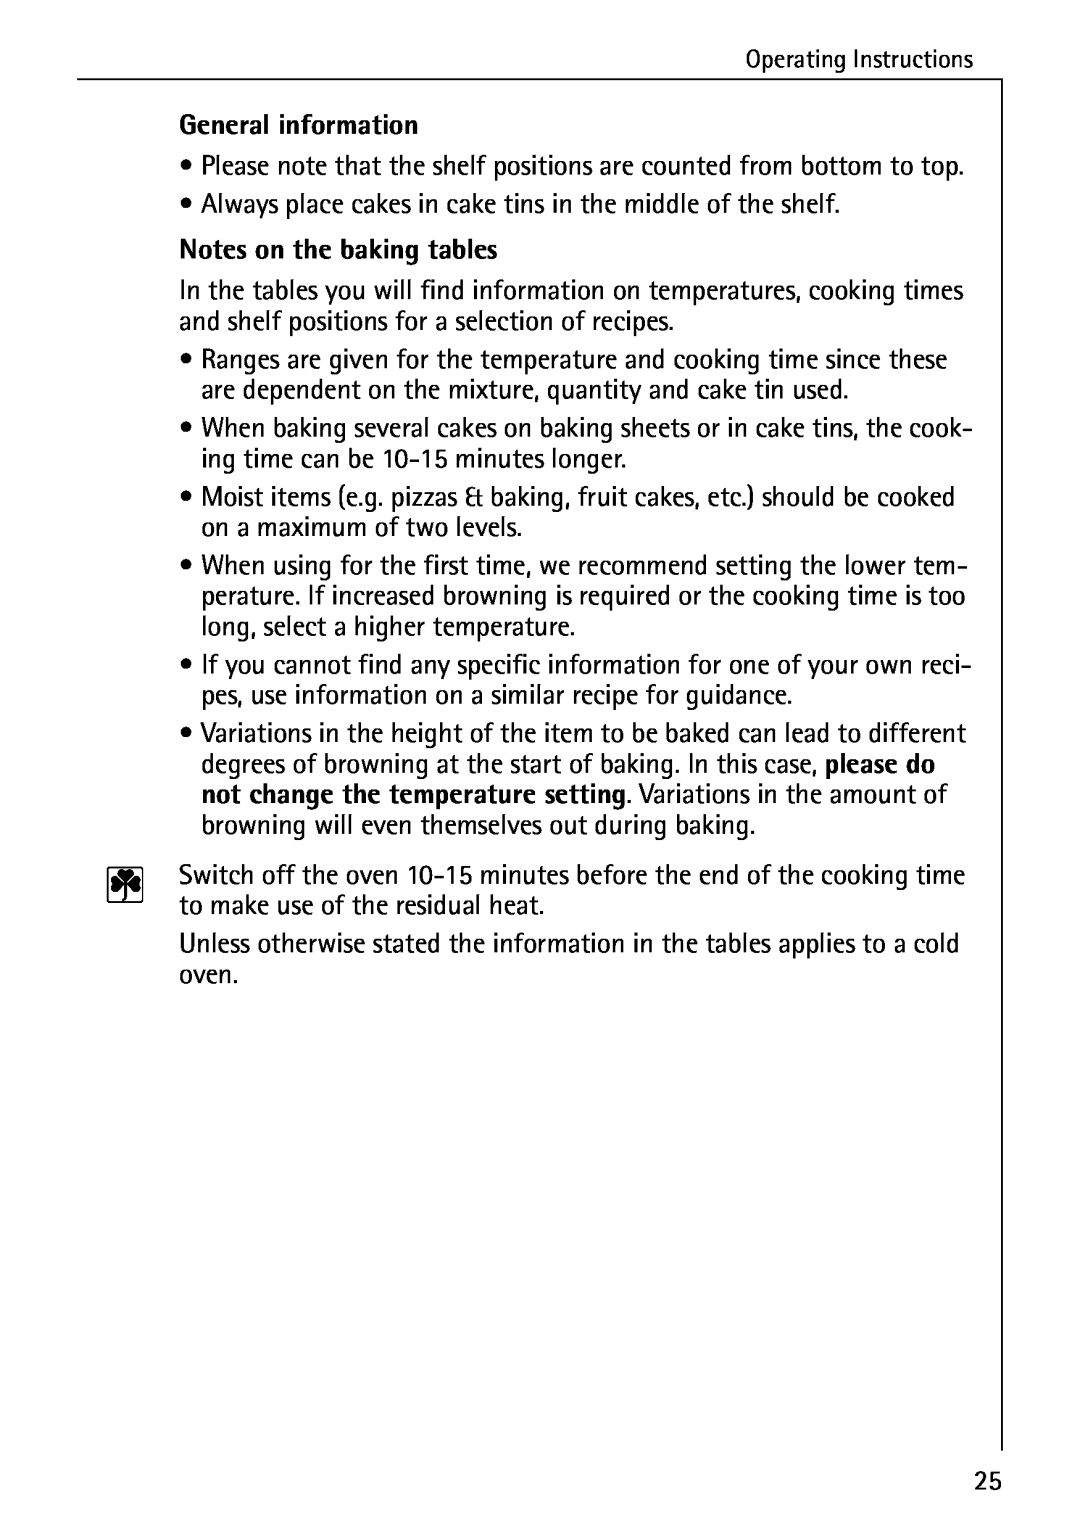 Electrolux B2190-1 manual General information, Notes on the baking tables 